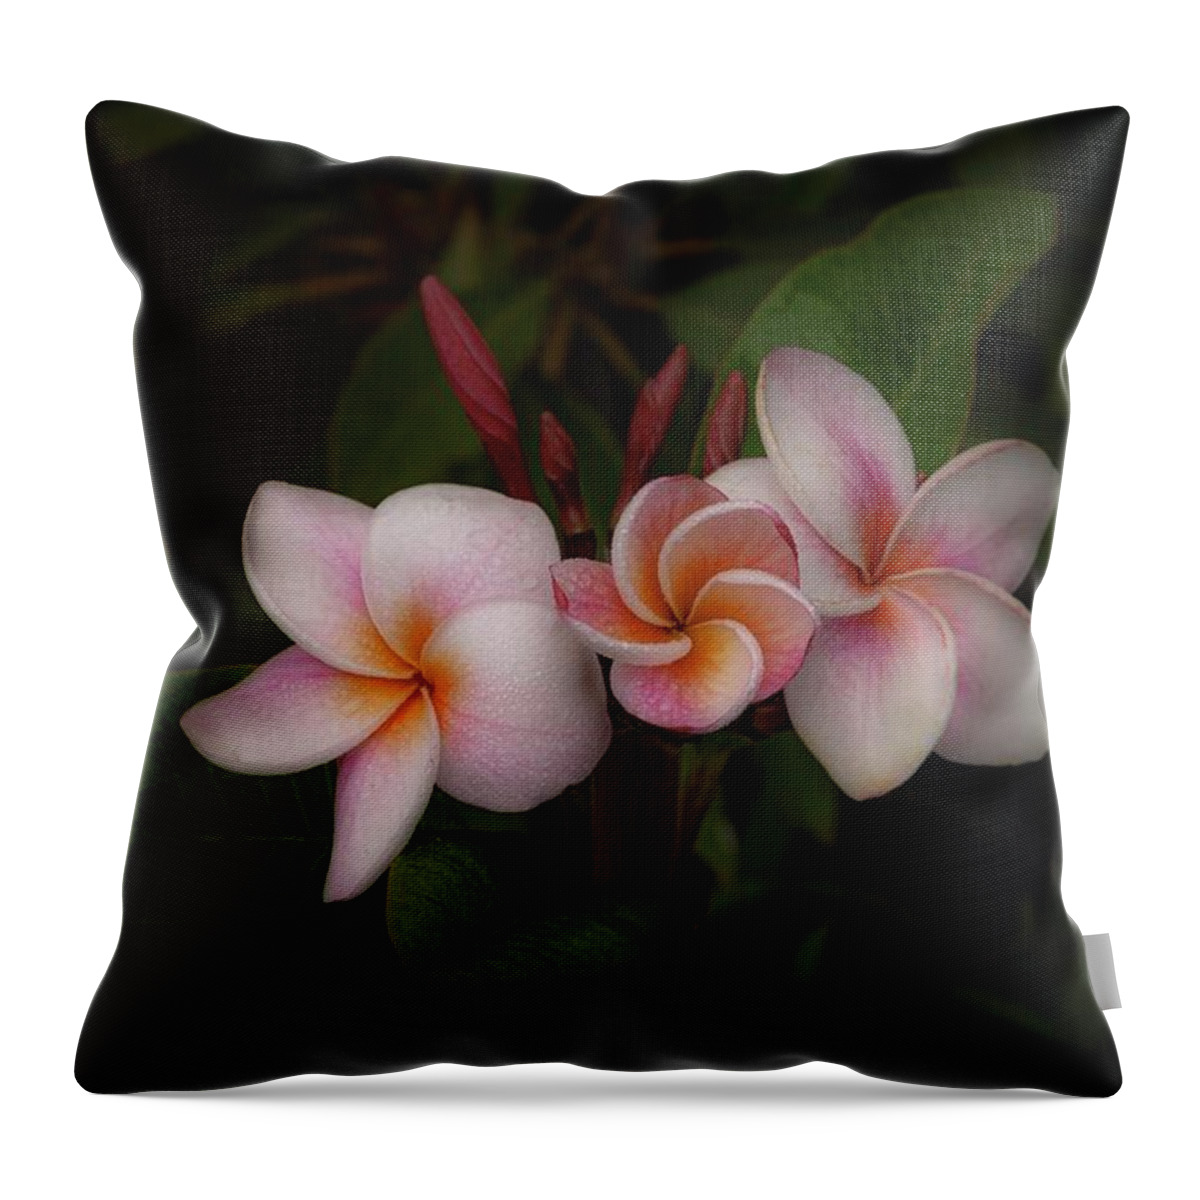 Photographs Throw Pillow featuring the photograph Plumerias In Bloom by John A Rodriguez